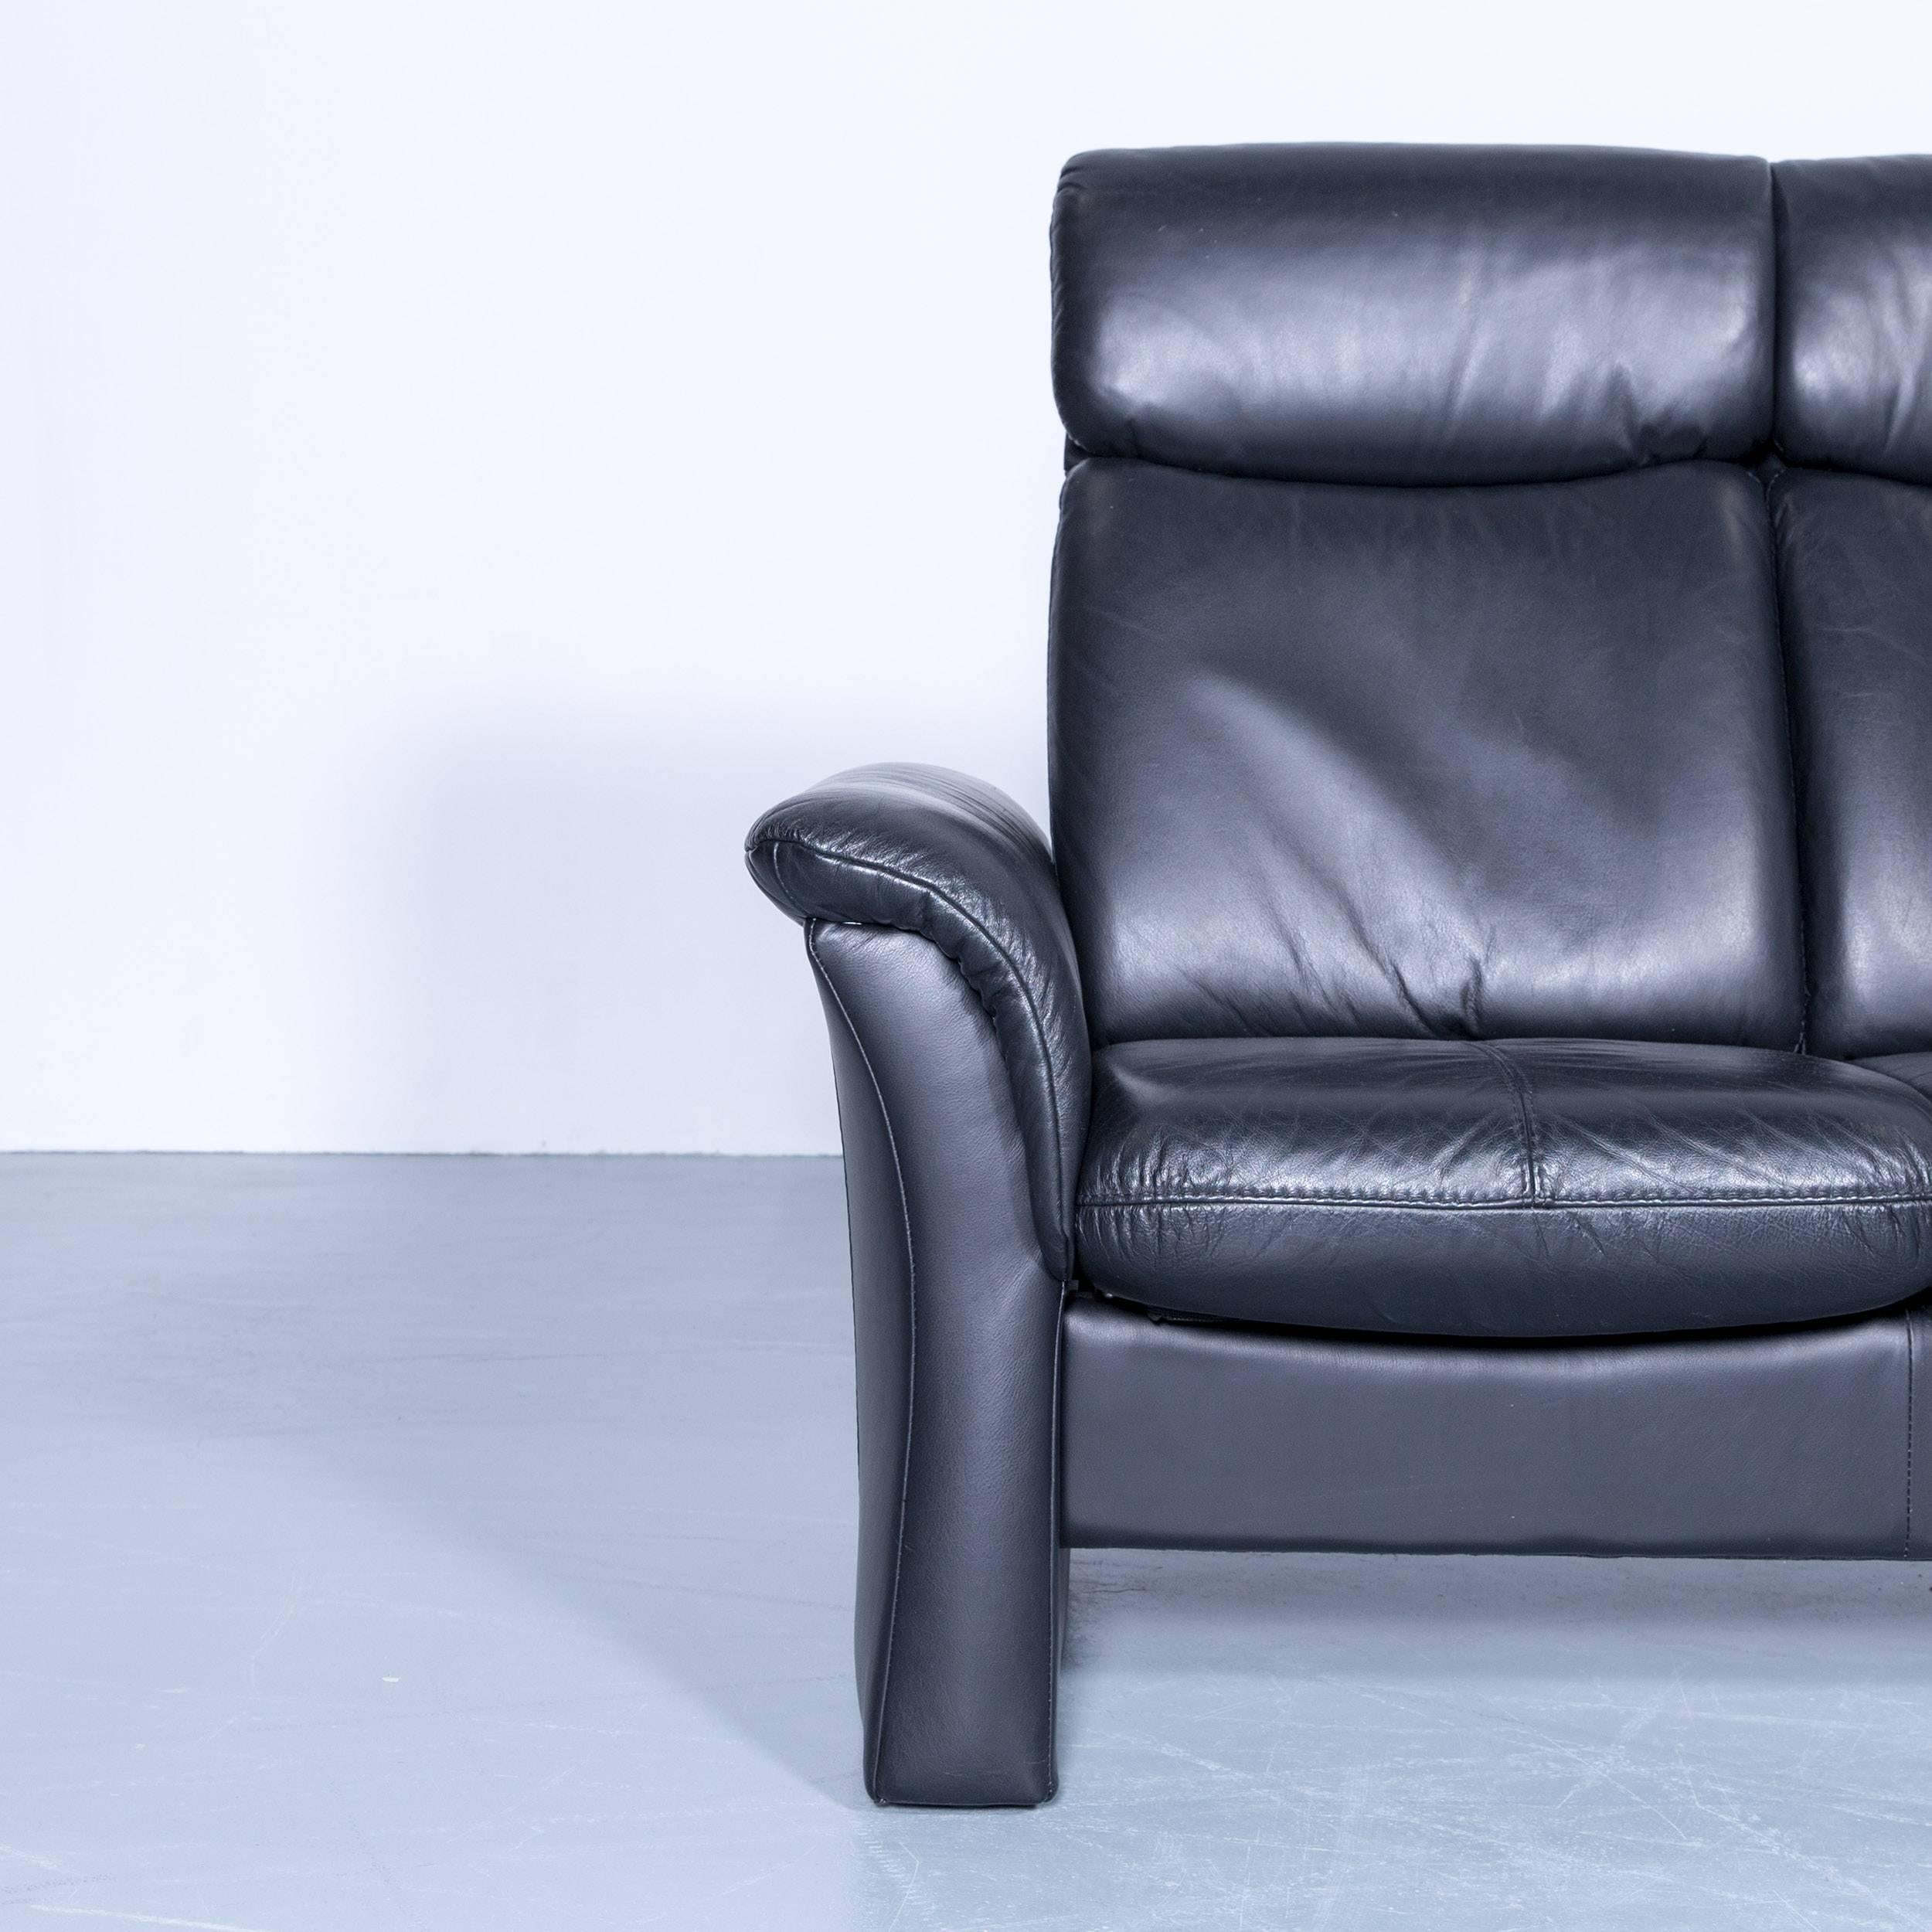 Designer three-seat sofa black relax couch leather function modern three-seat in a minimalistic and modern design, with convenient functions, made for pure comfort and flexibility.